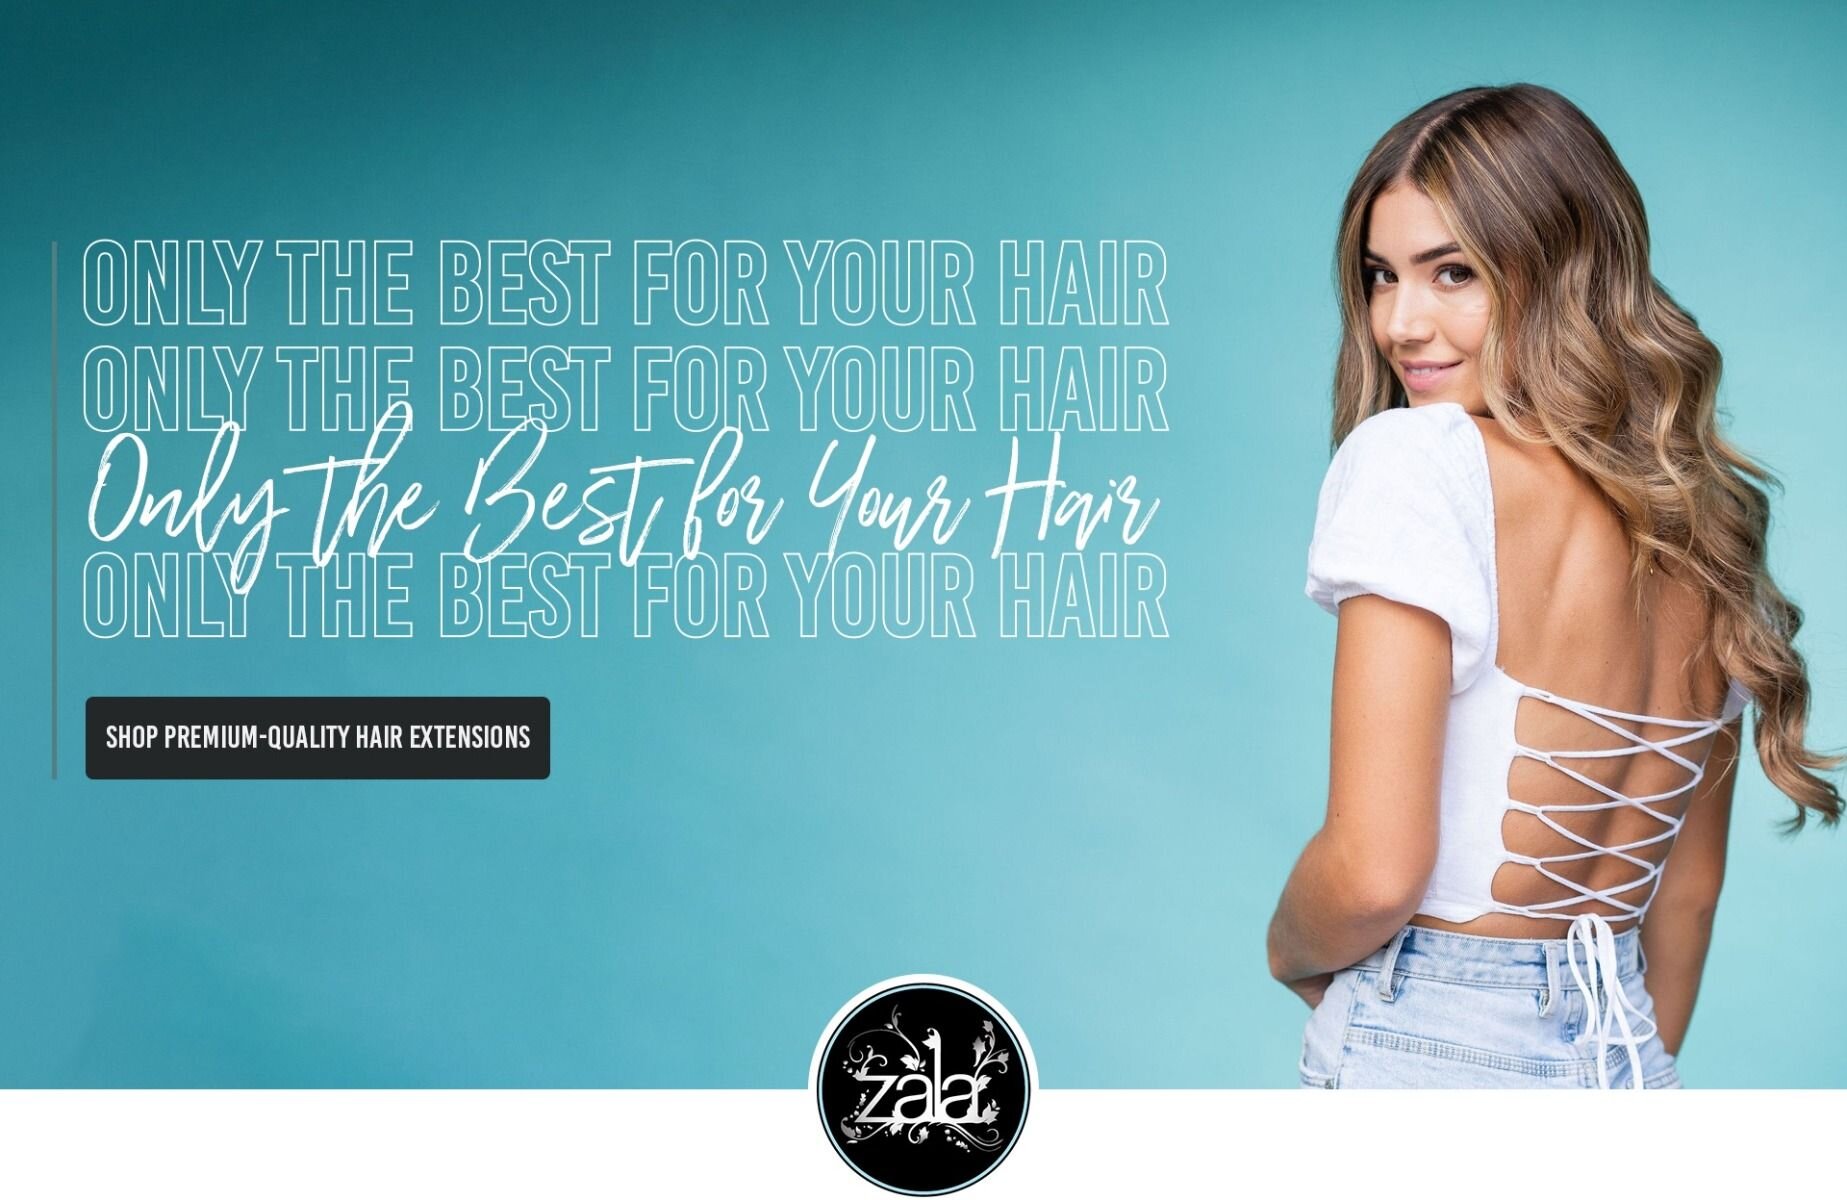 Premium quality hair - only the best hair